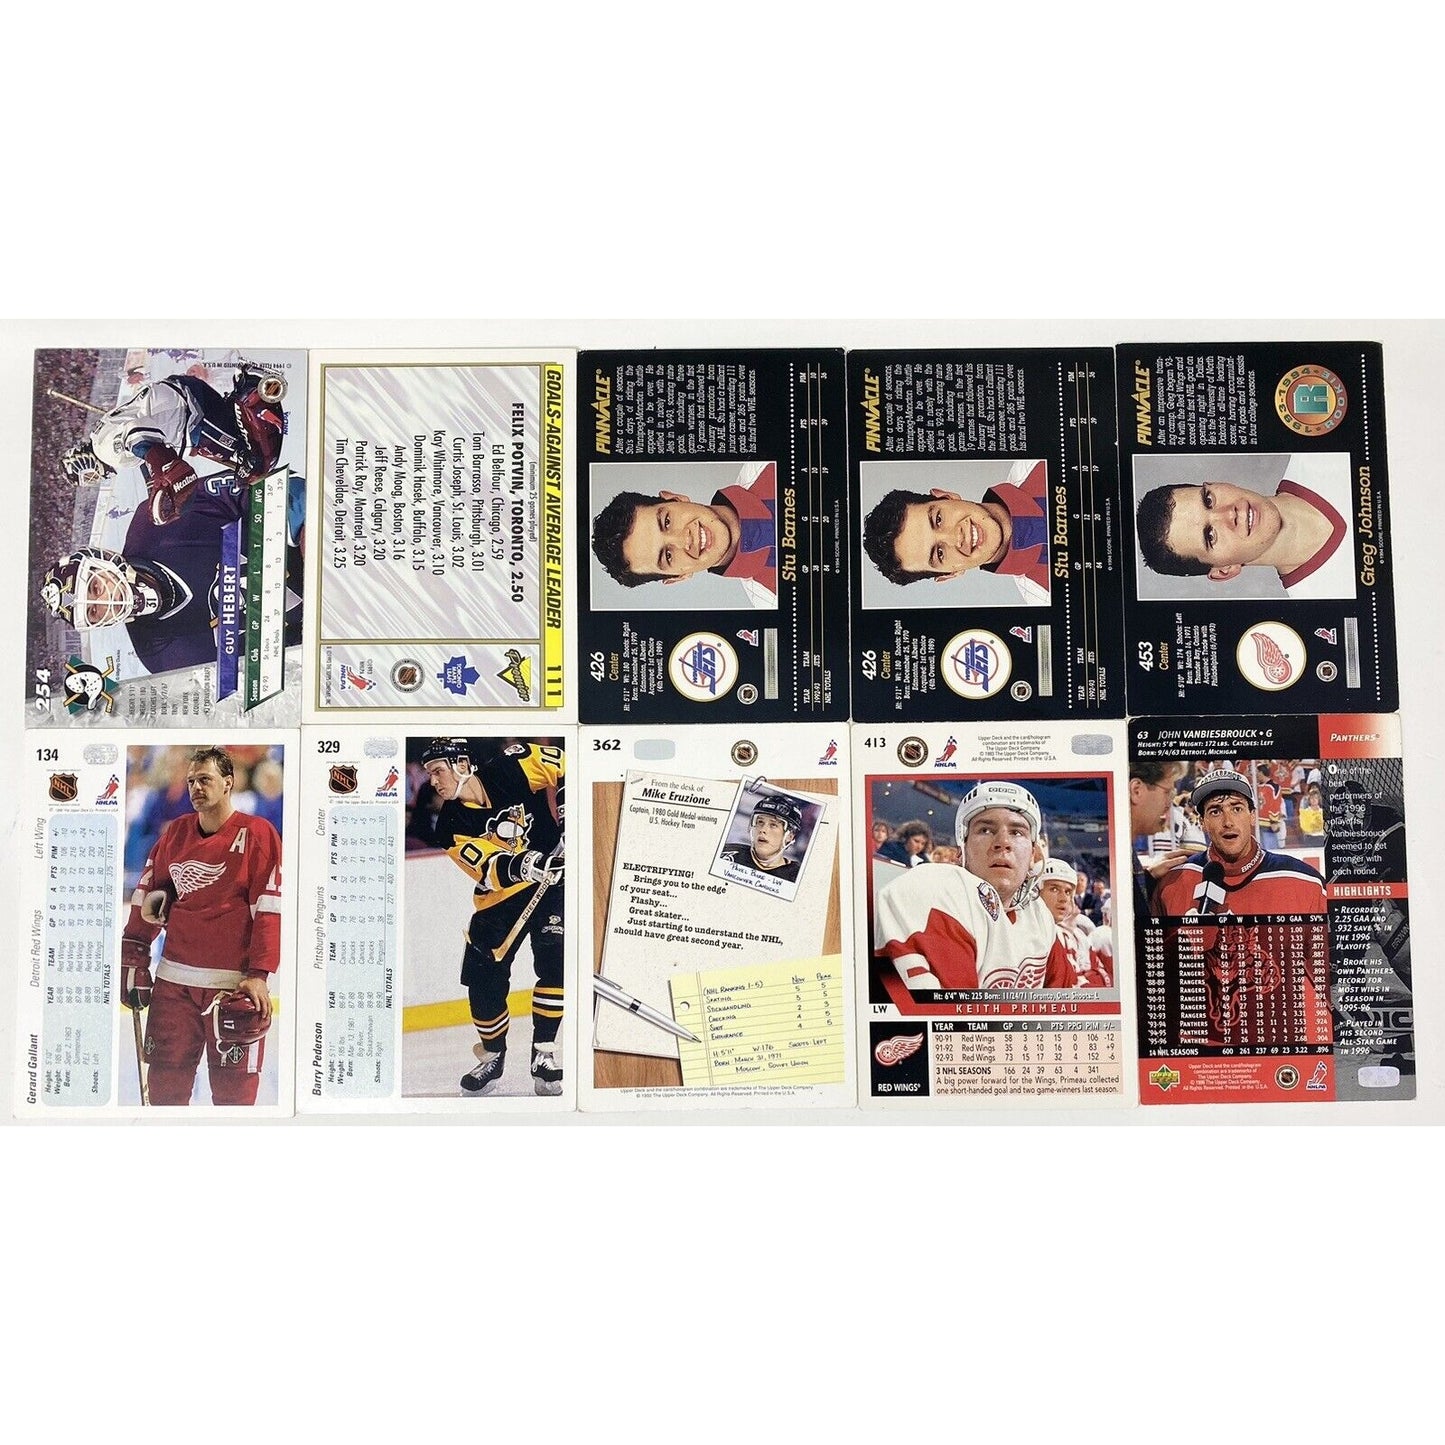 Vintage 1990's Mixed Lot of 25 NHL Hockey Trading Cards